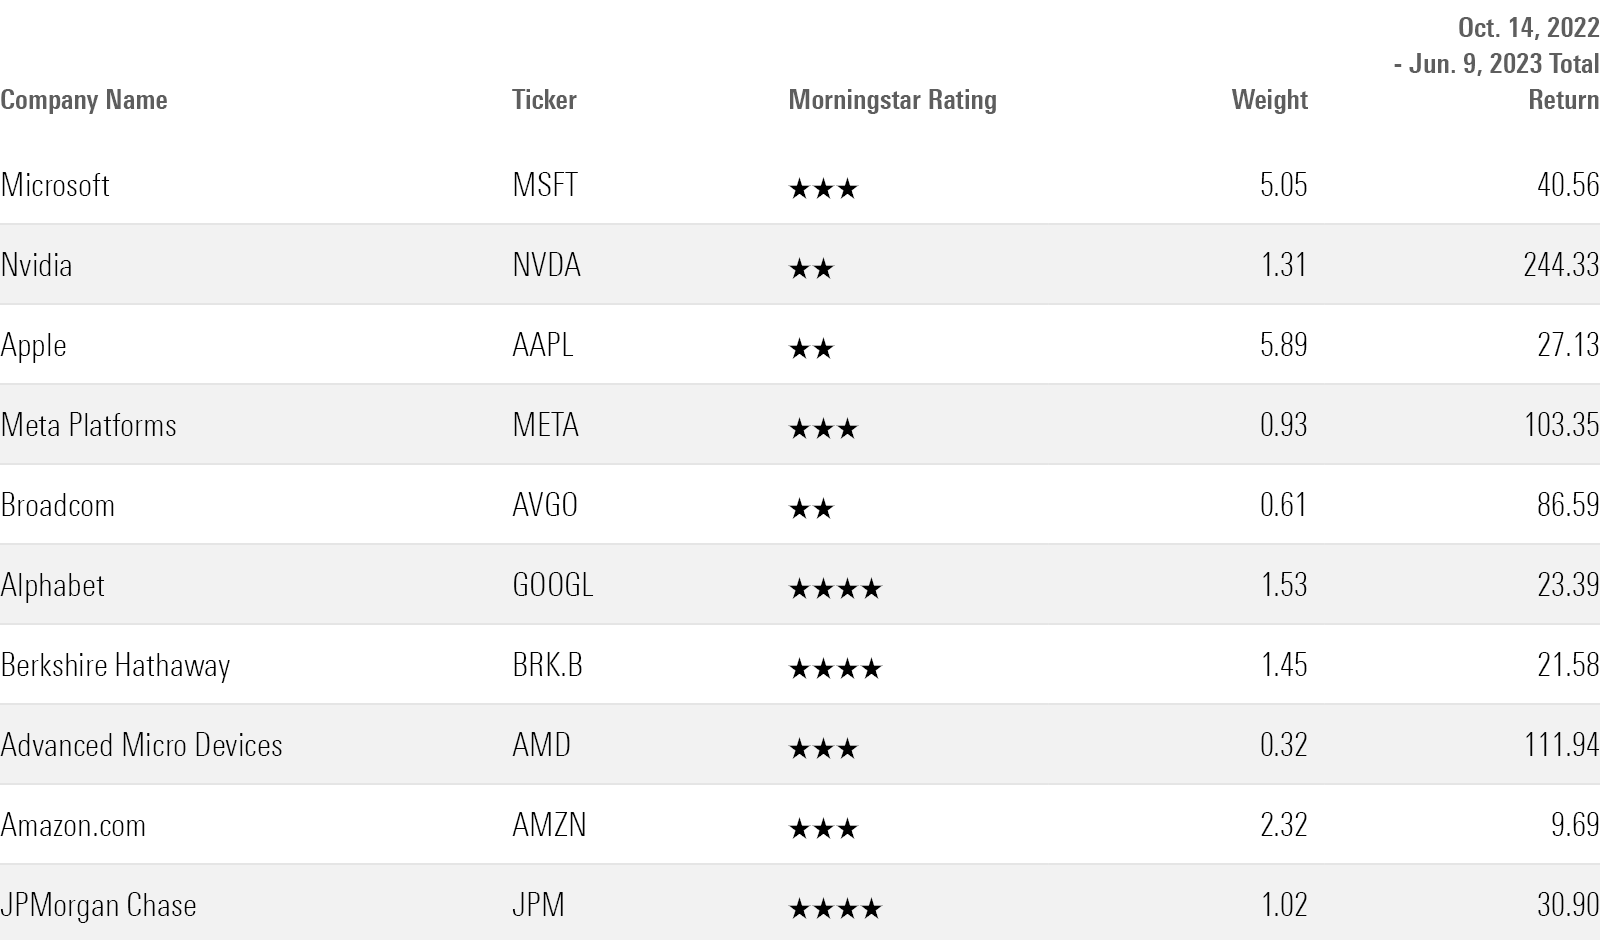 Table listing companies that have led the Morningstar US Market Index since the October 14, 2022 low.